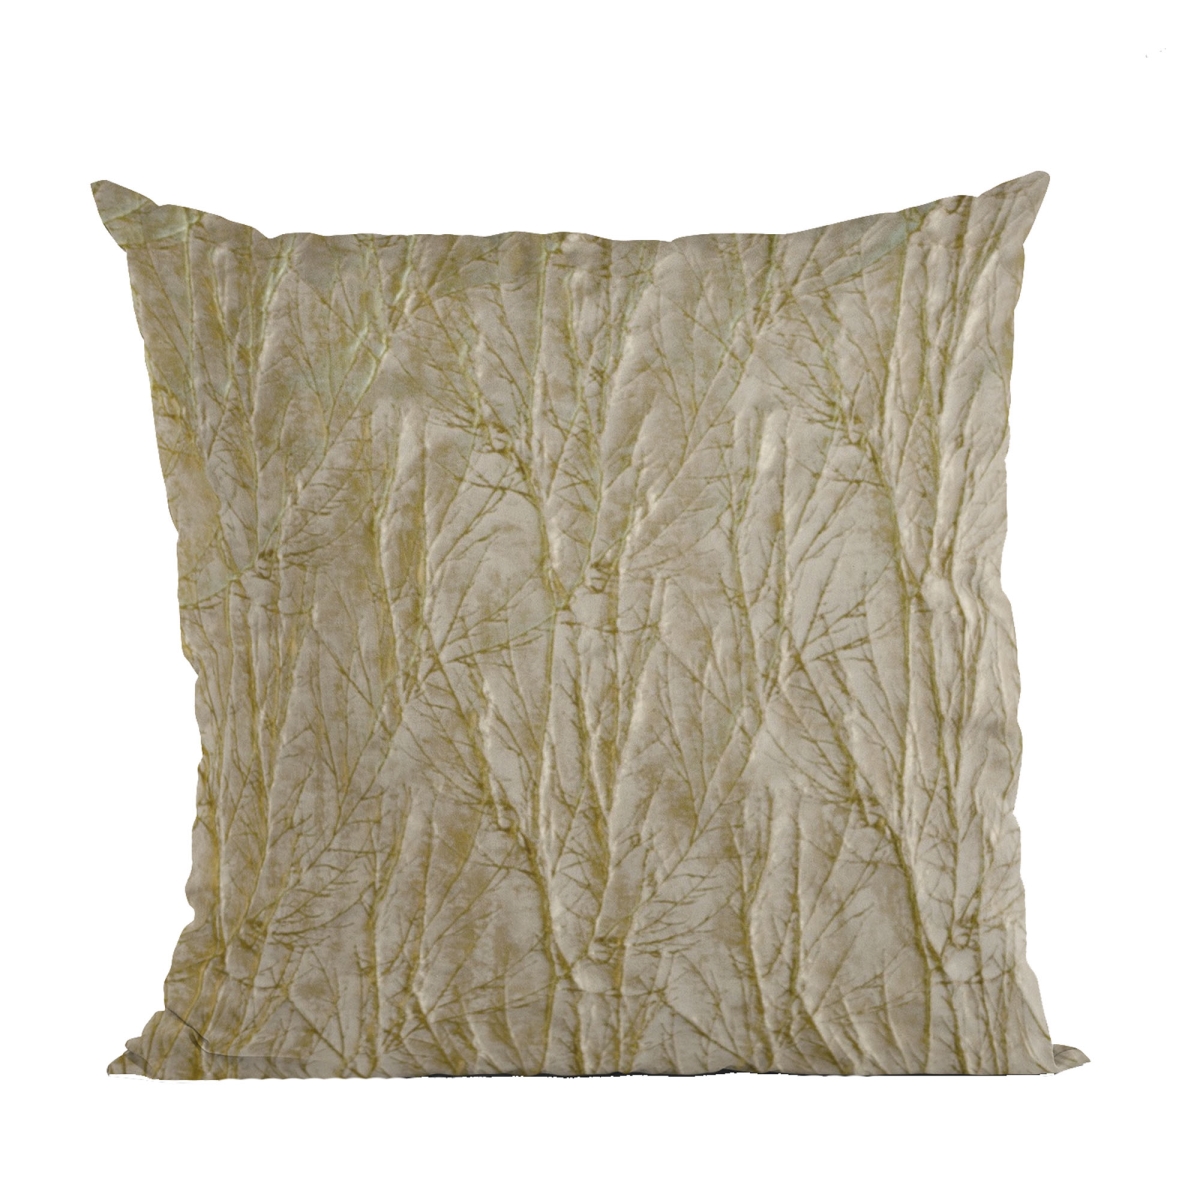 Plutus Brands PBCF2173-1616-DP Golden Yarns Shiny Fabric with Twig Pattern Luxury Throw Pillow - 16 x 16 in.